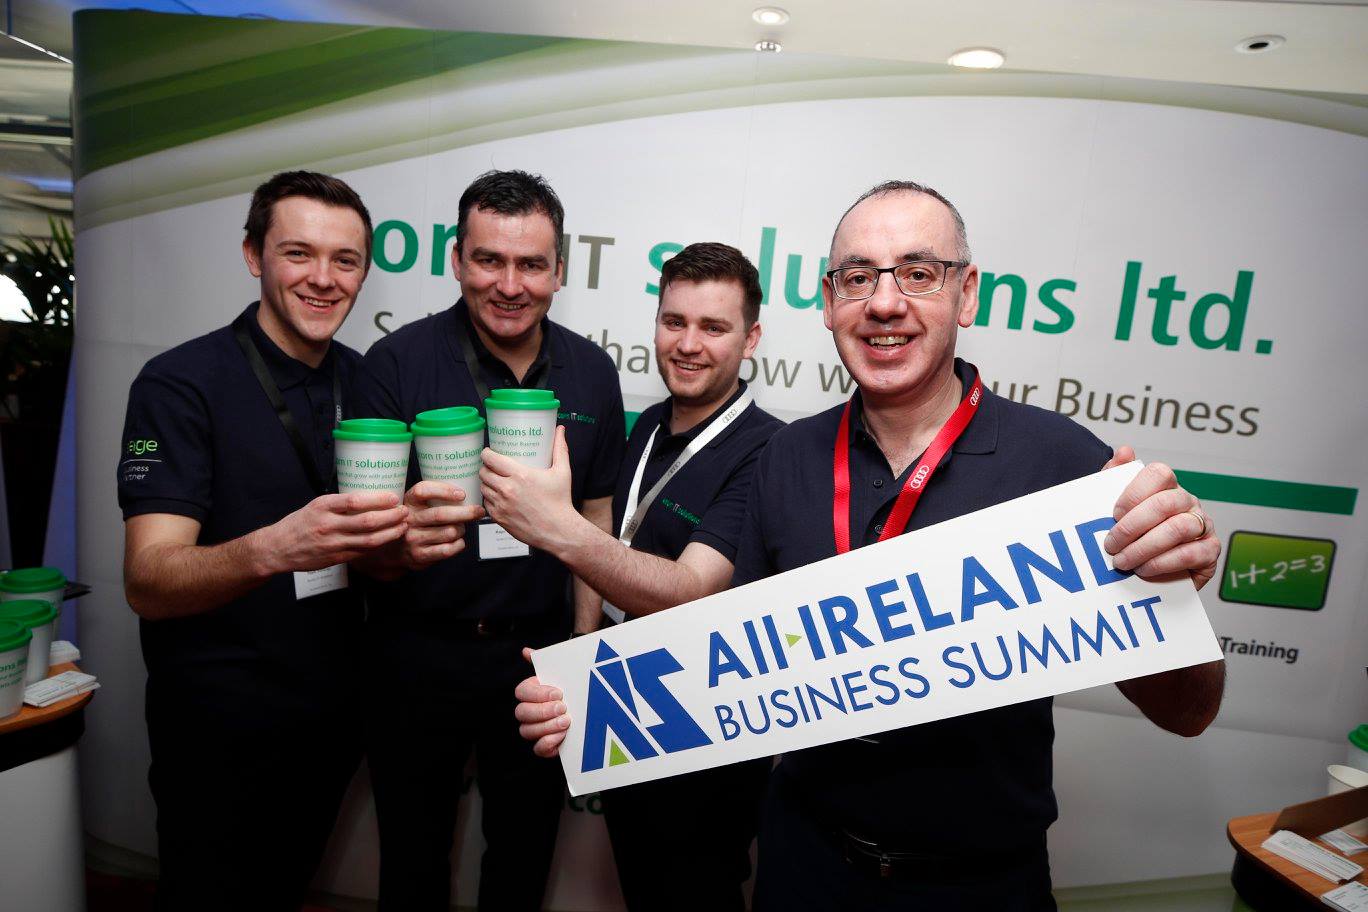 Acorn BMS exhibit at the All Ireland Business Summit